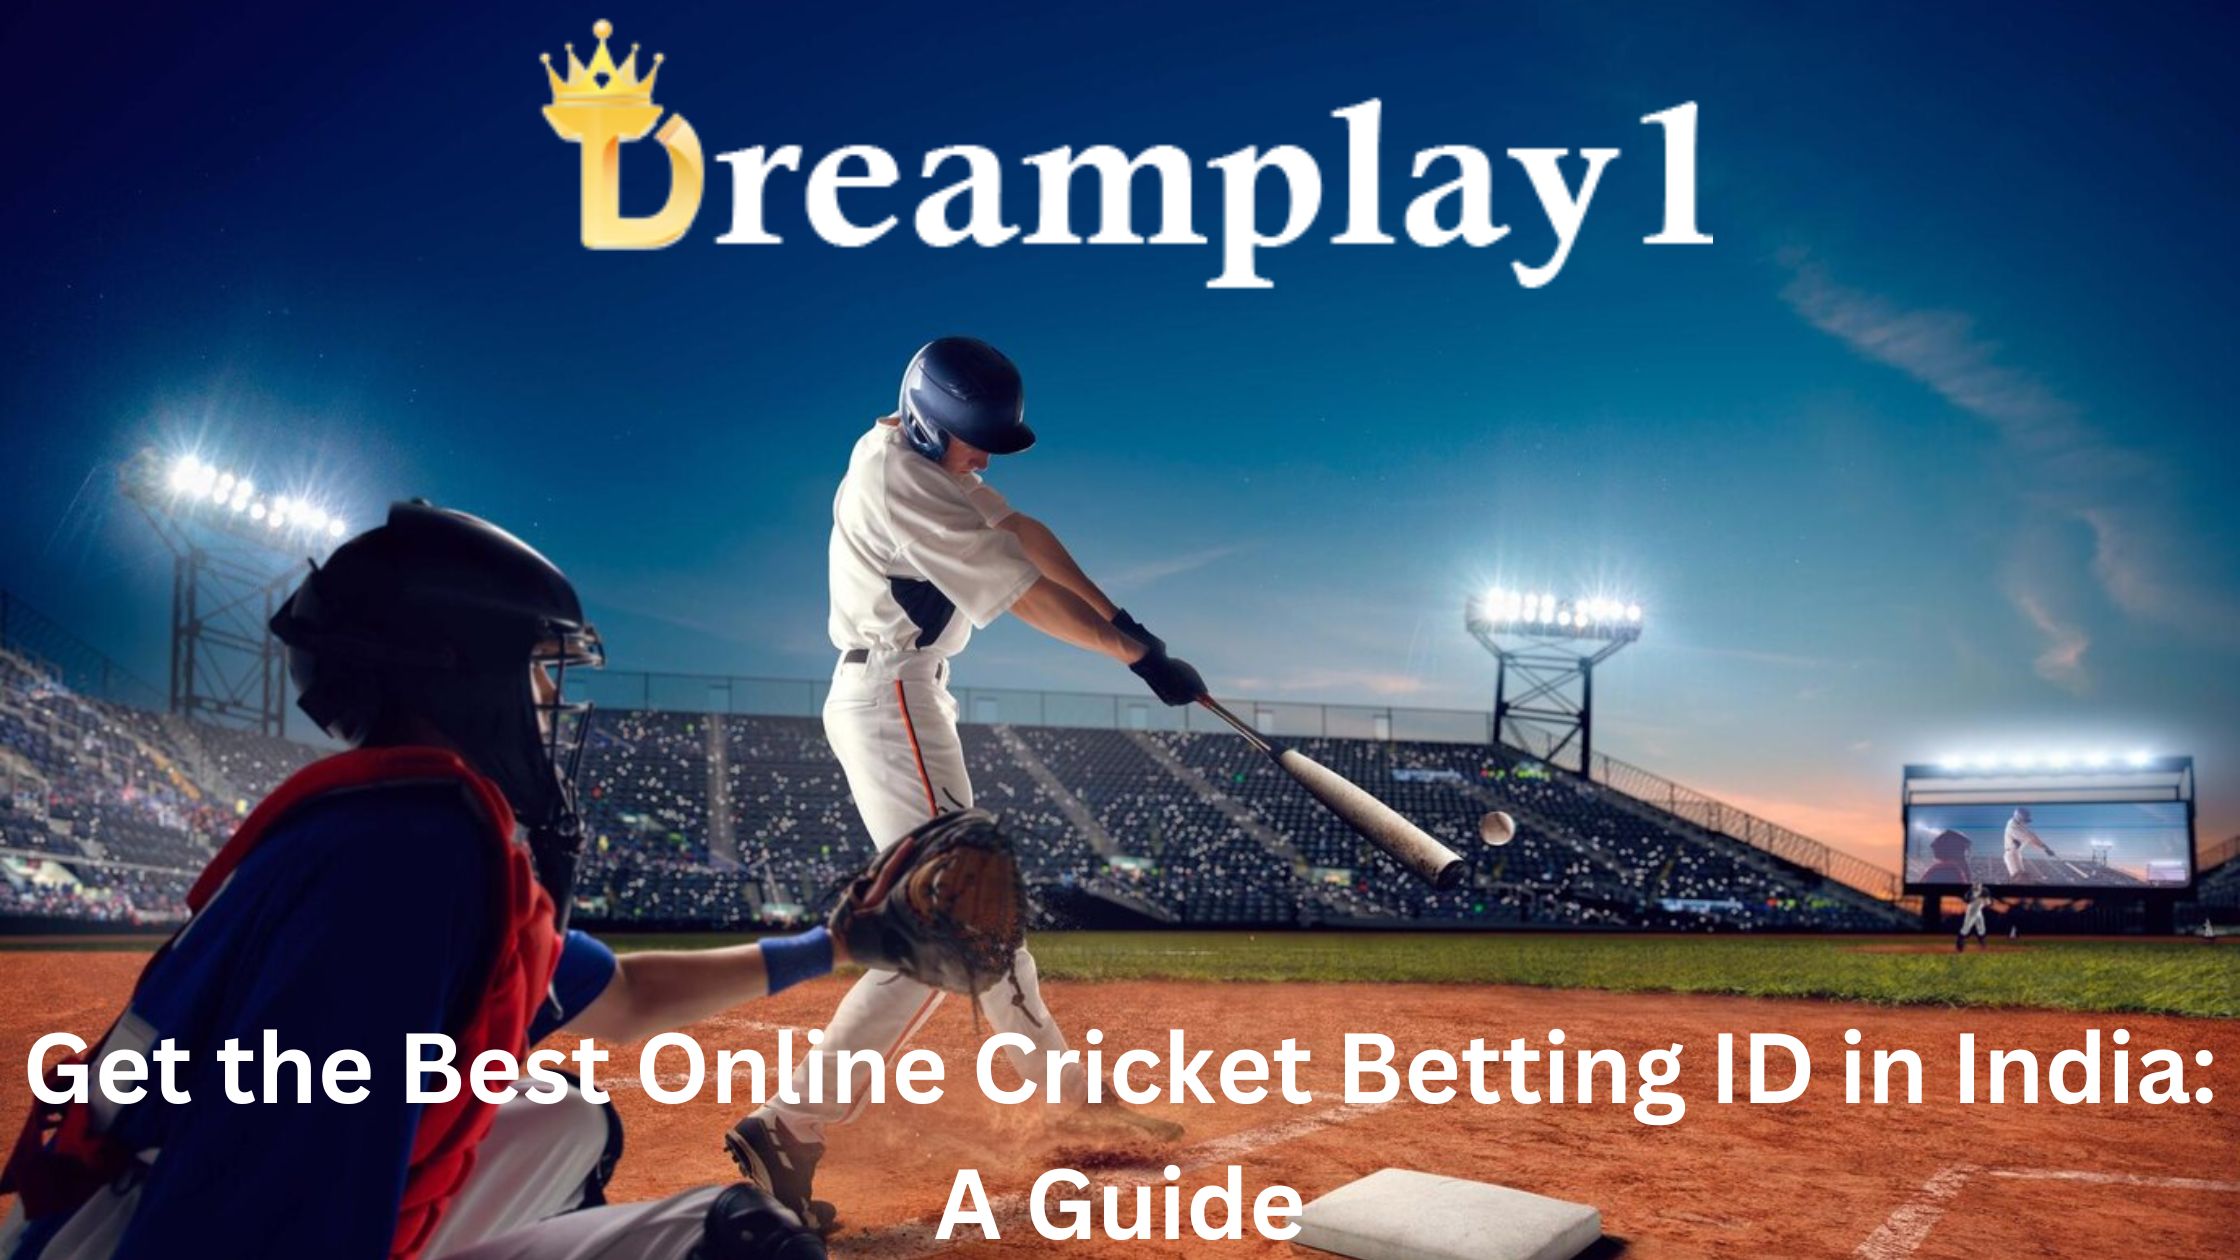 Get the Best Online Cricket Betting ID in India: A Guide